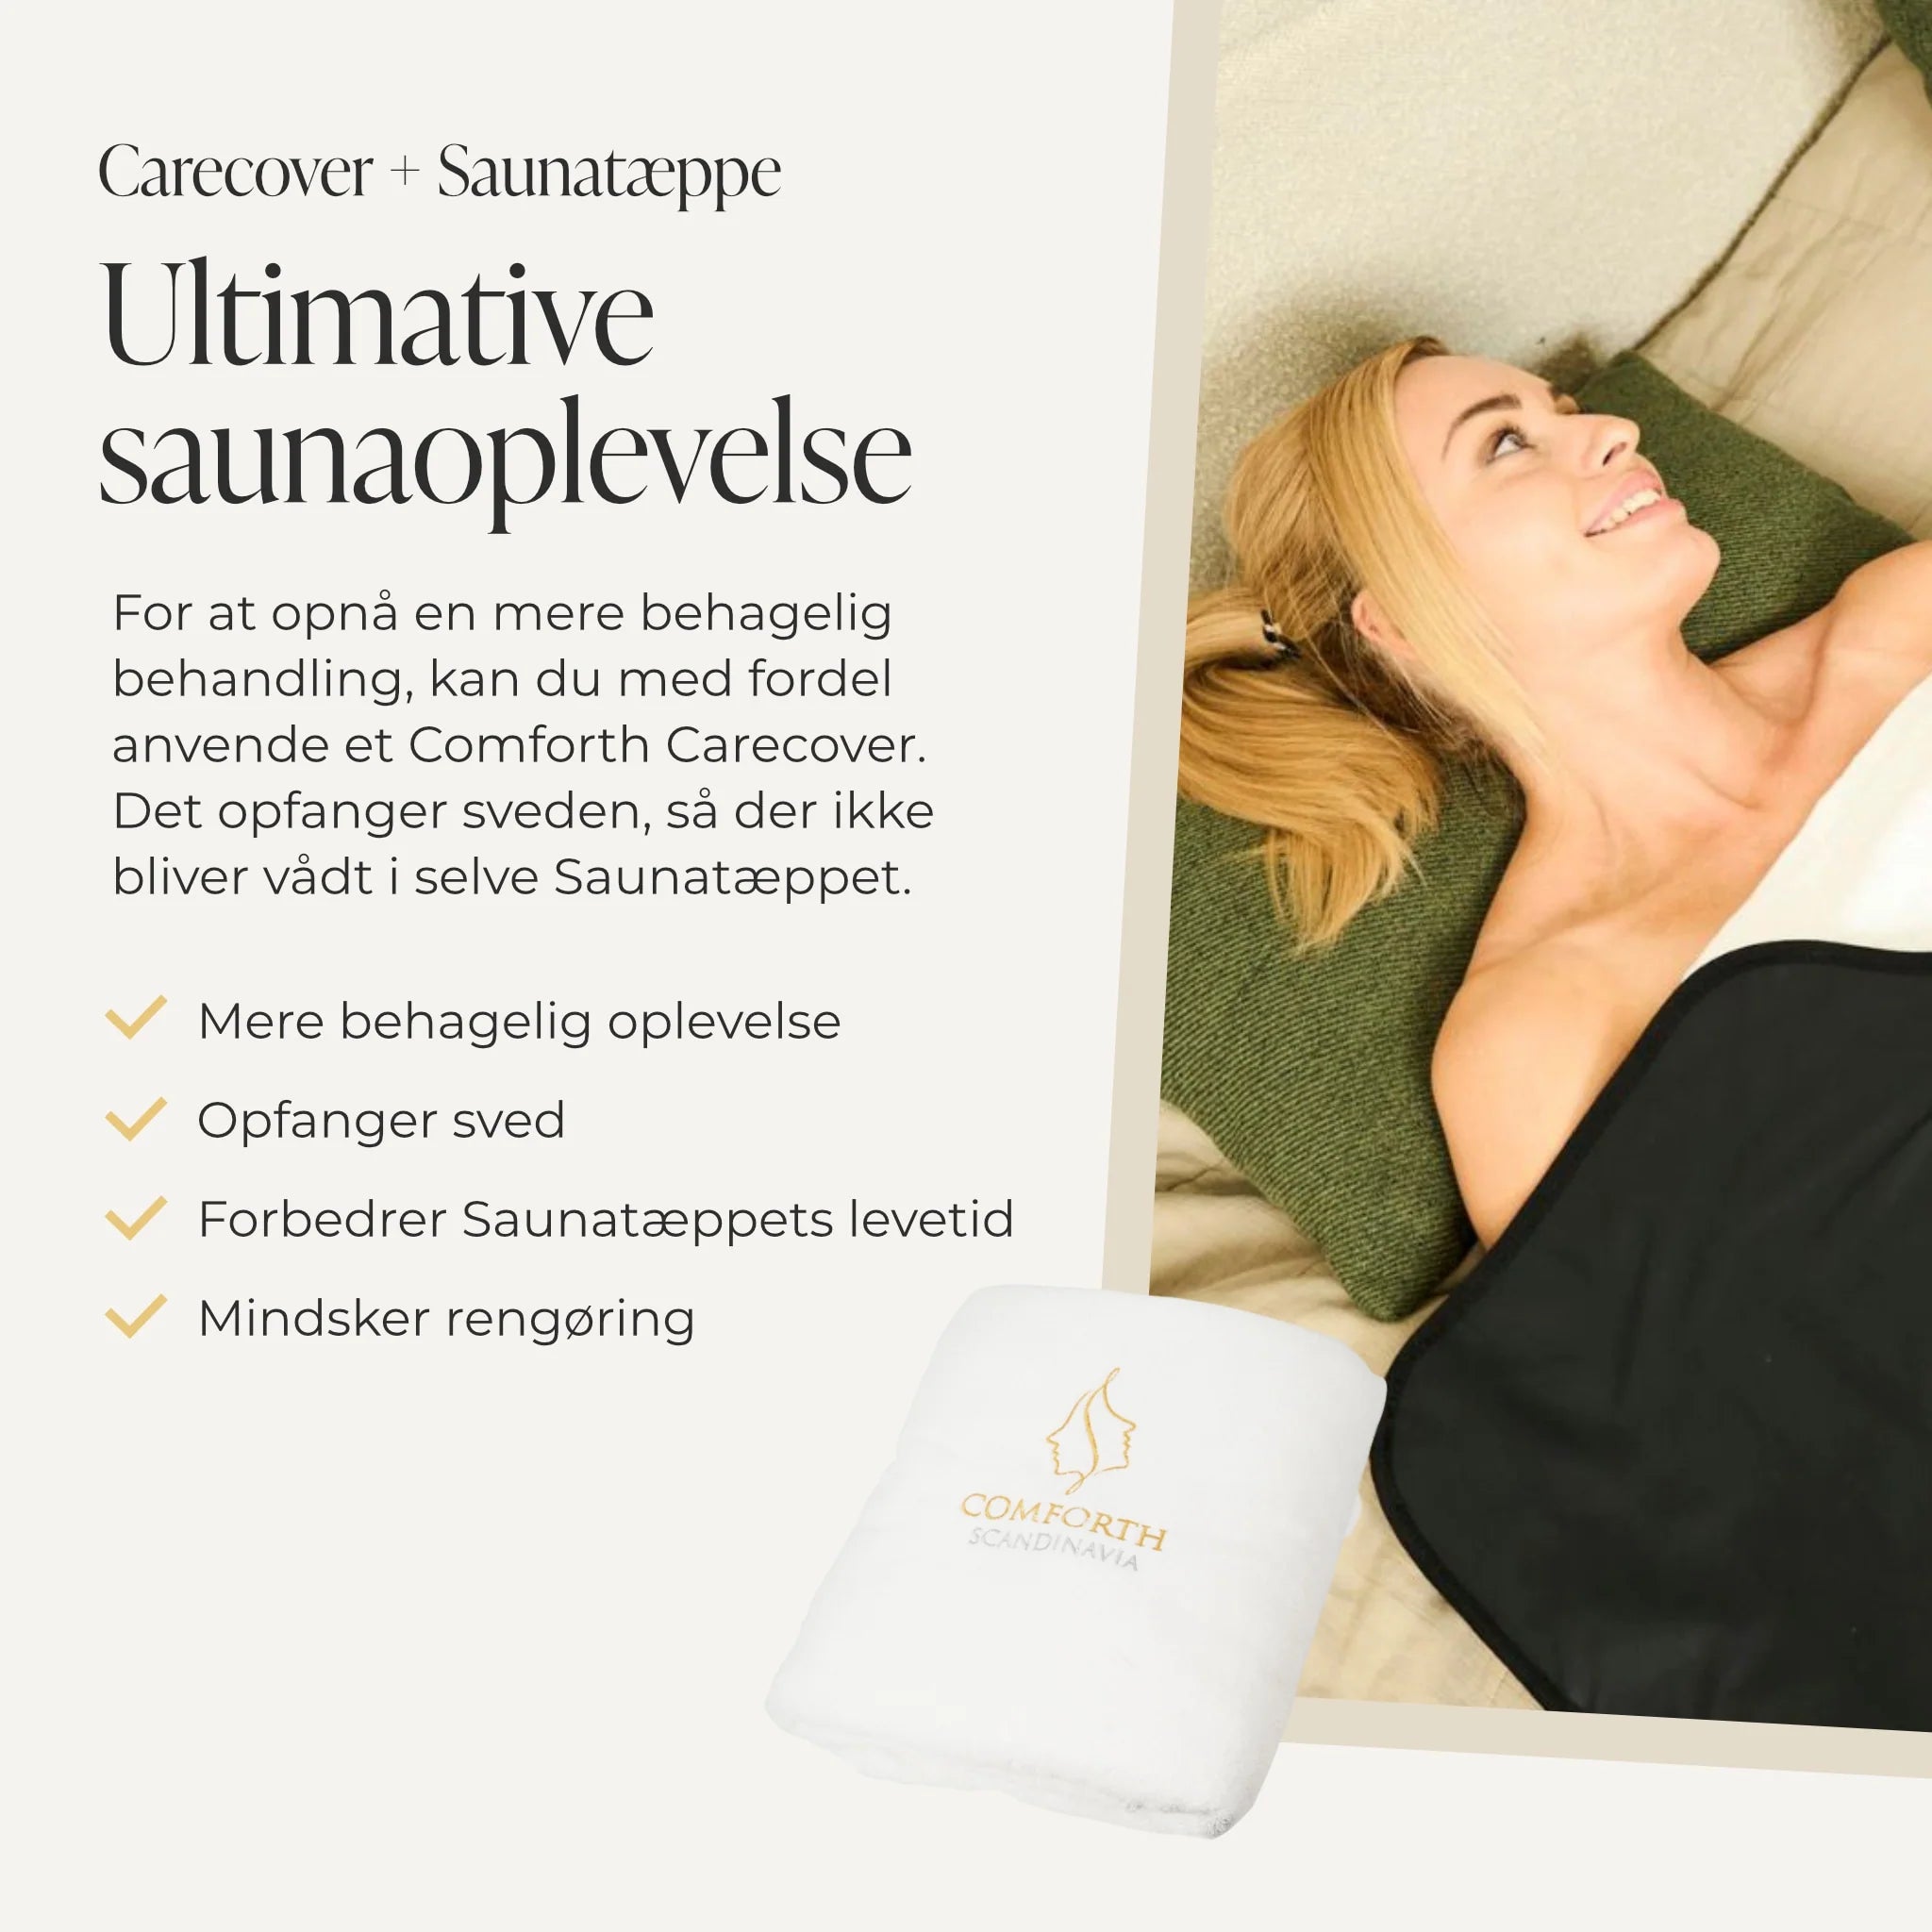 Comforth Carecover